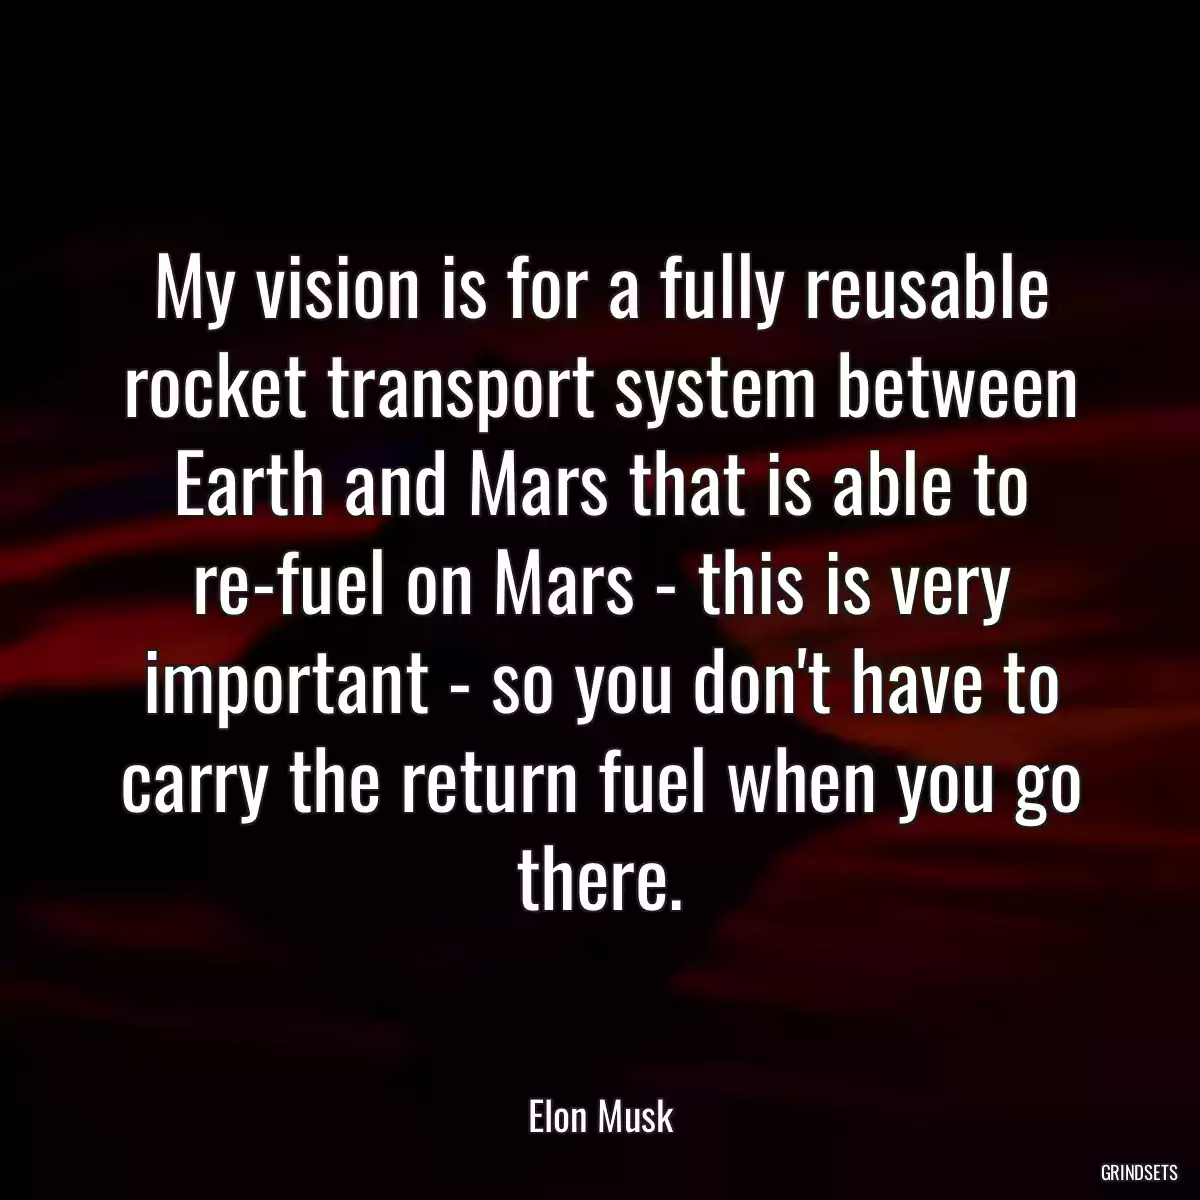 My vision is for a fully reusable rocket transport system between Earth and Mars that is able to re-fuel on Mars - this is very important - so you don\'t have to carry the return fuel when you go there.